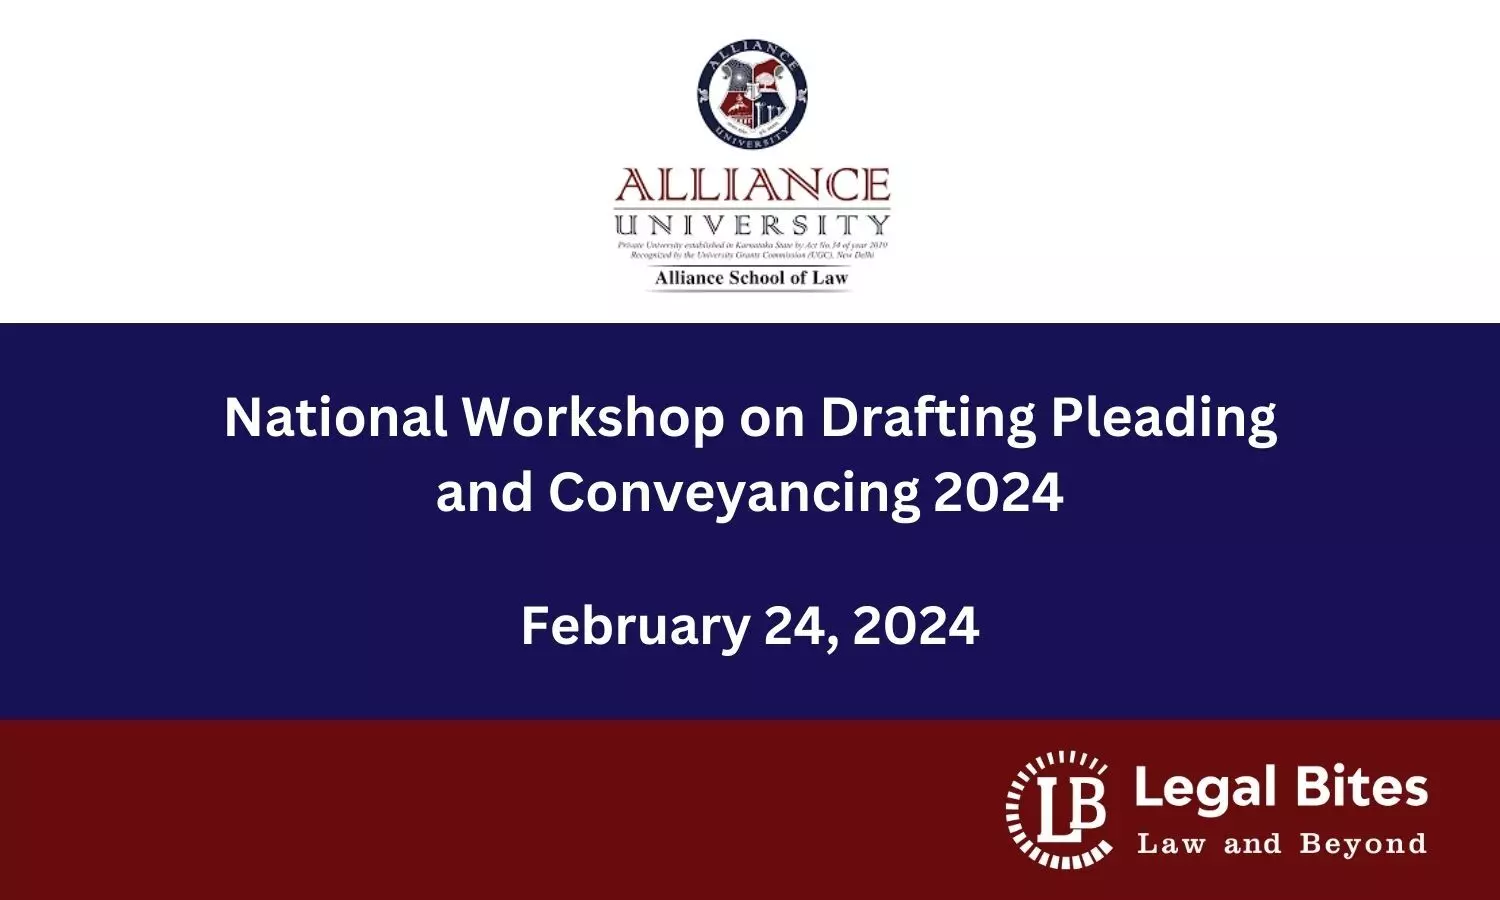 National Workshop on Drafting Pleading and Conveyancing 2024